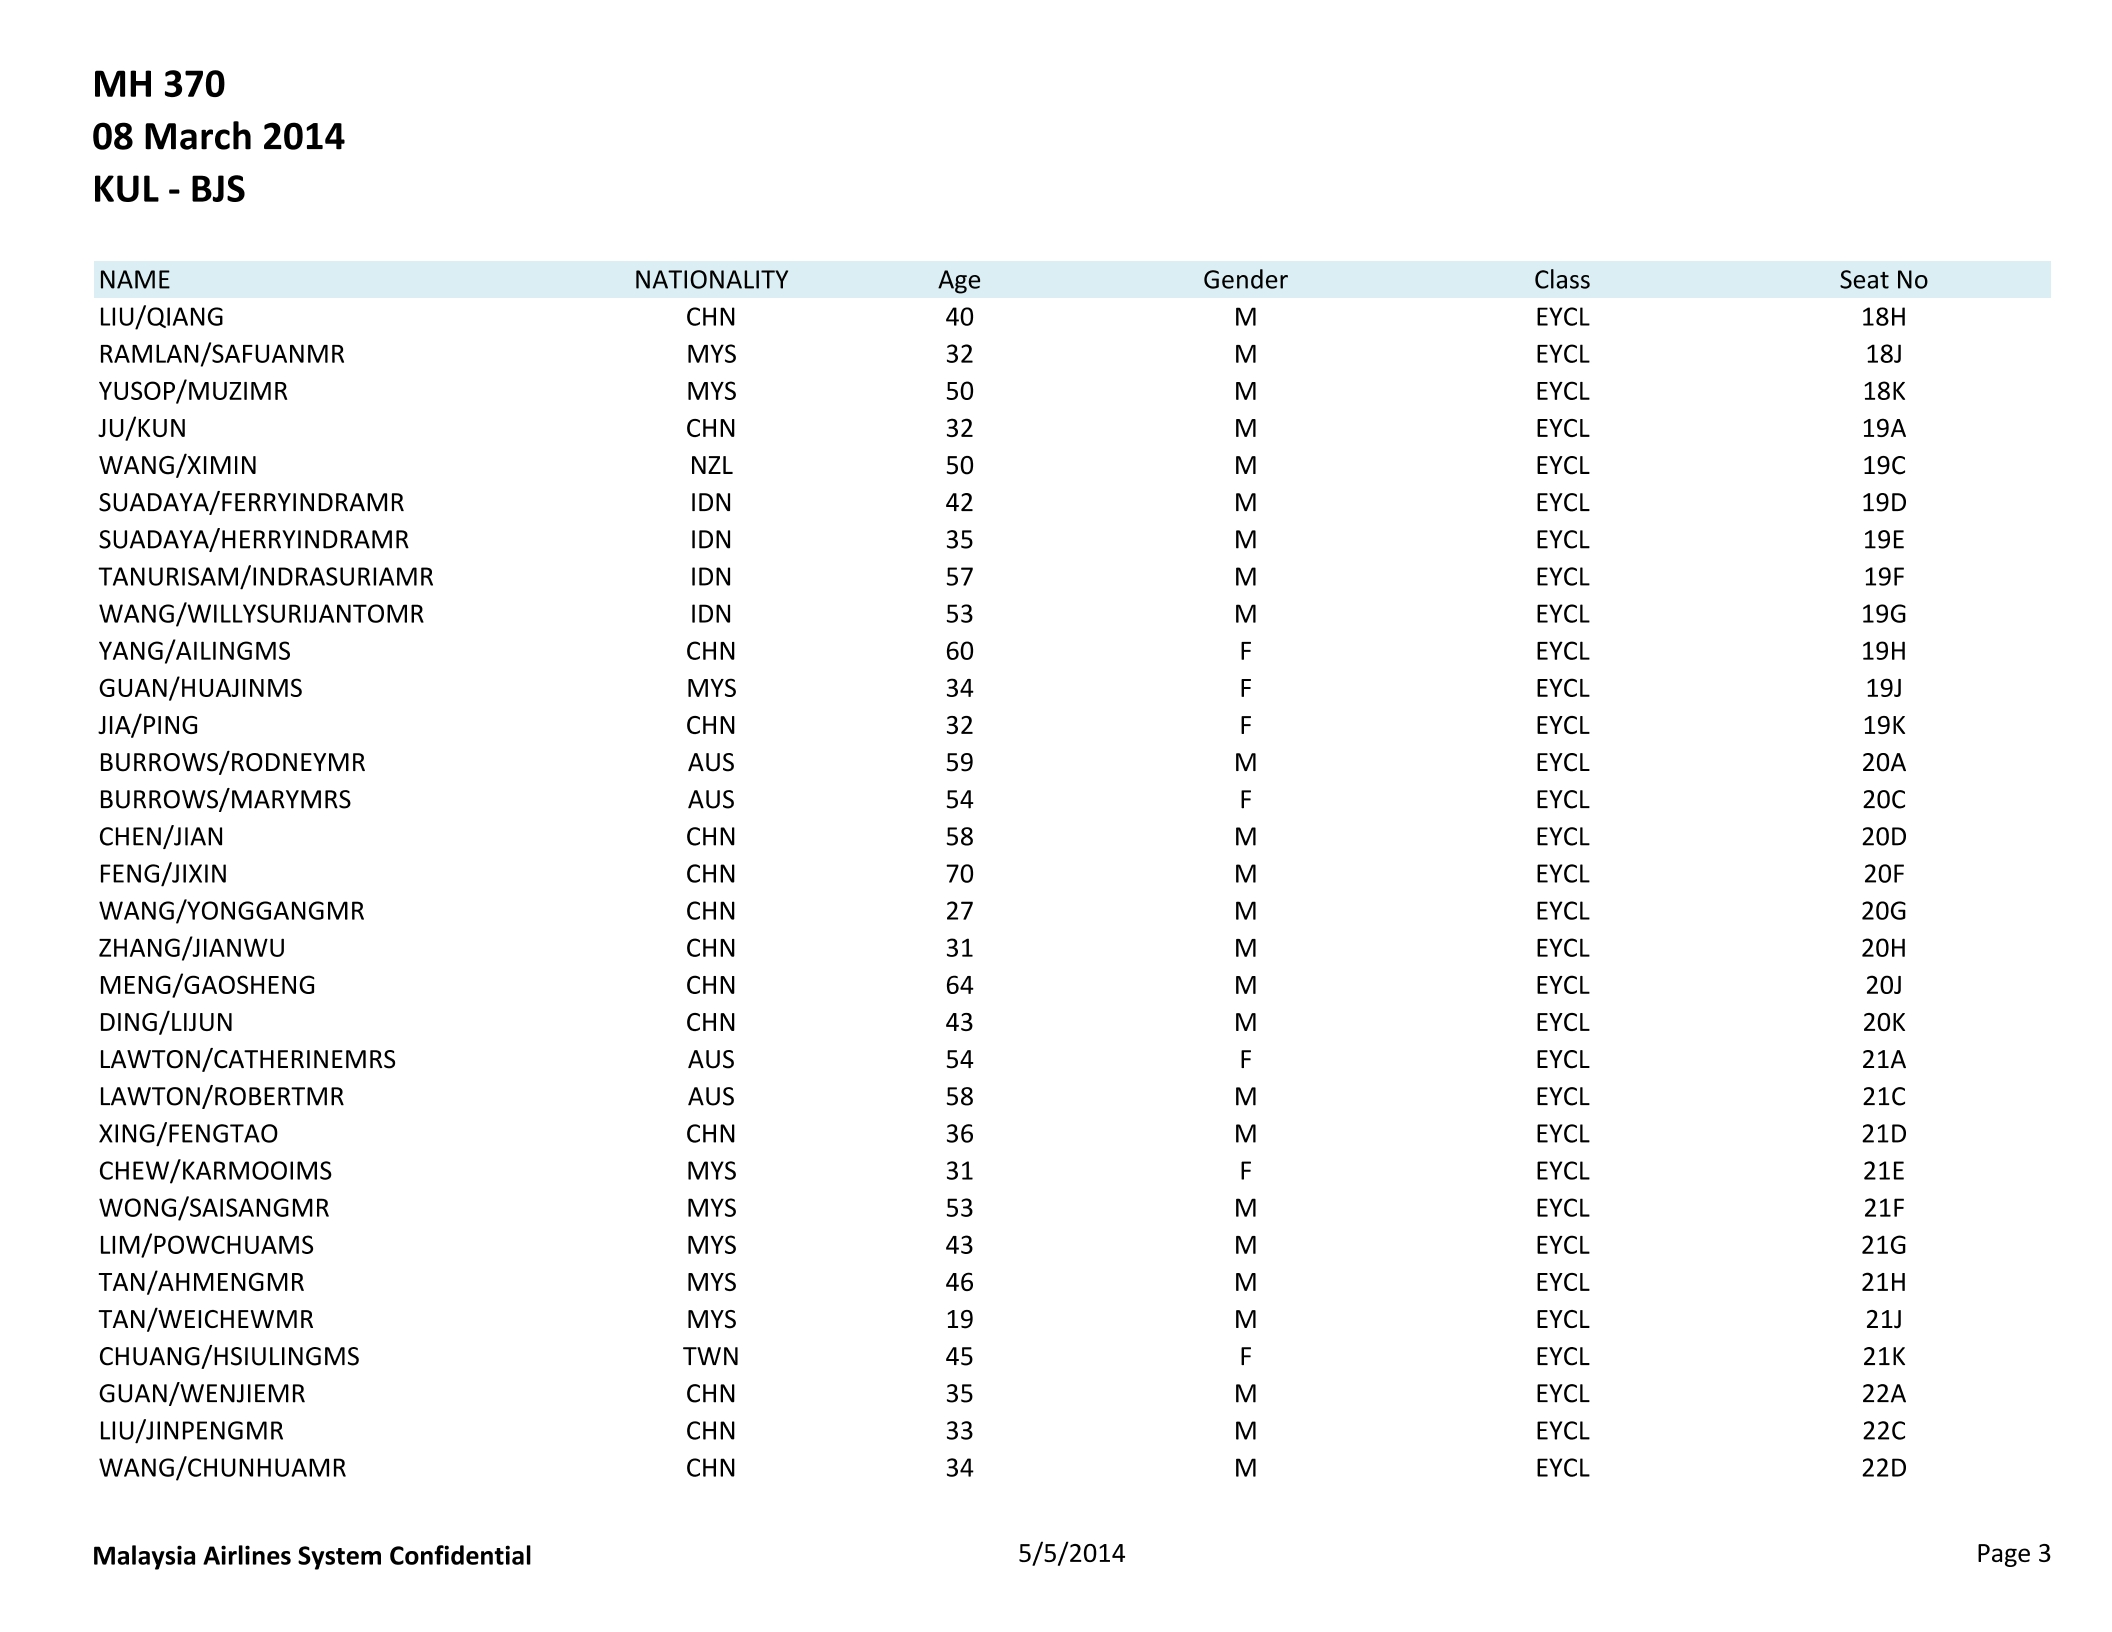 Malaysia Airlines Flight MH370 Passenger Manifest 5 May 2014 Page 3